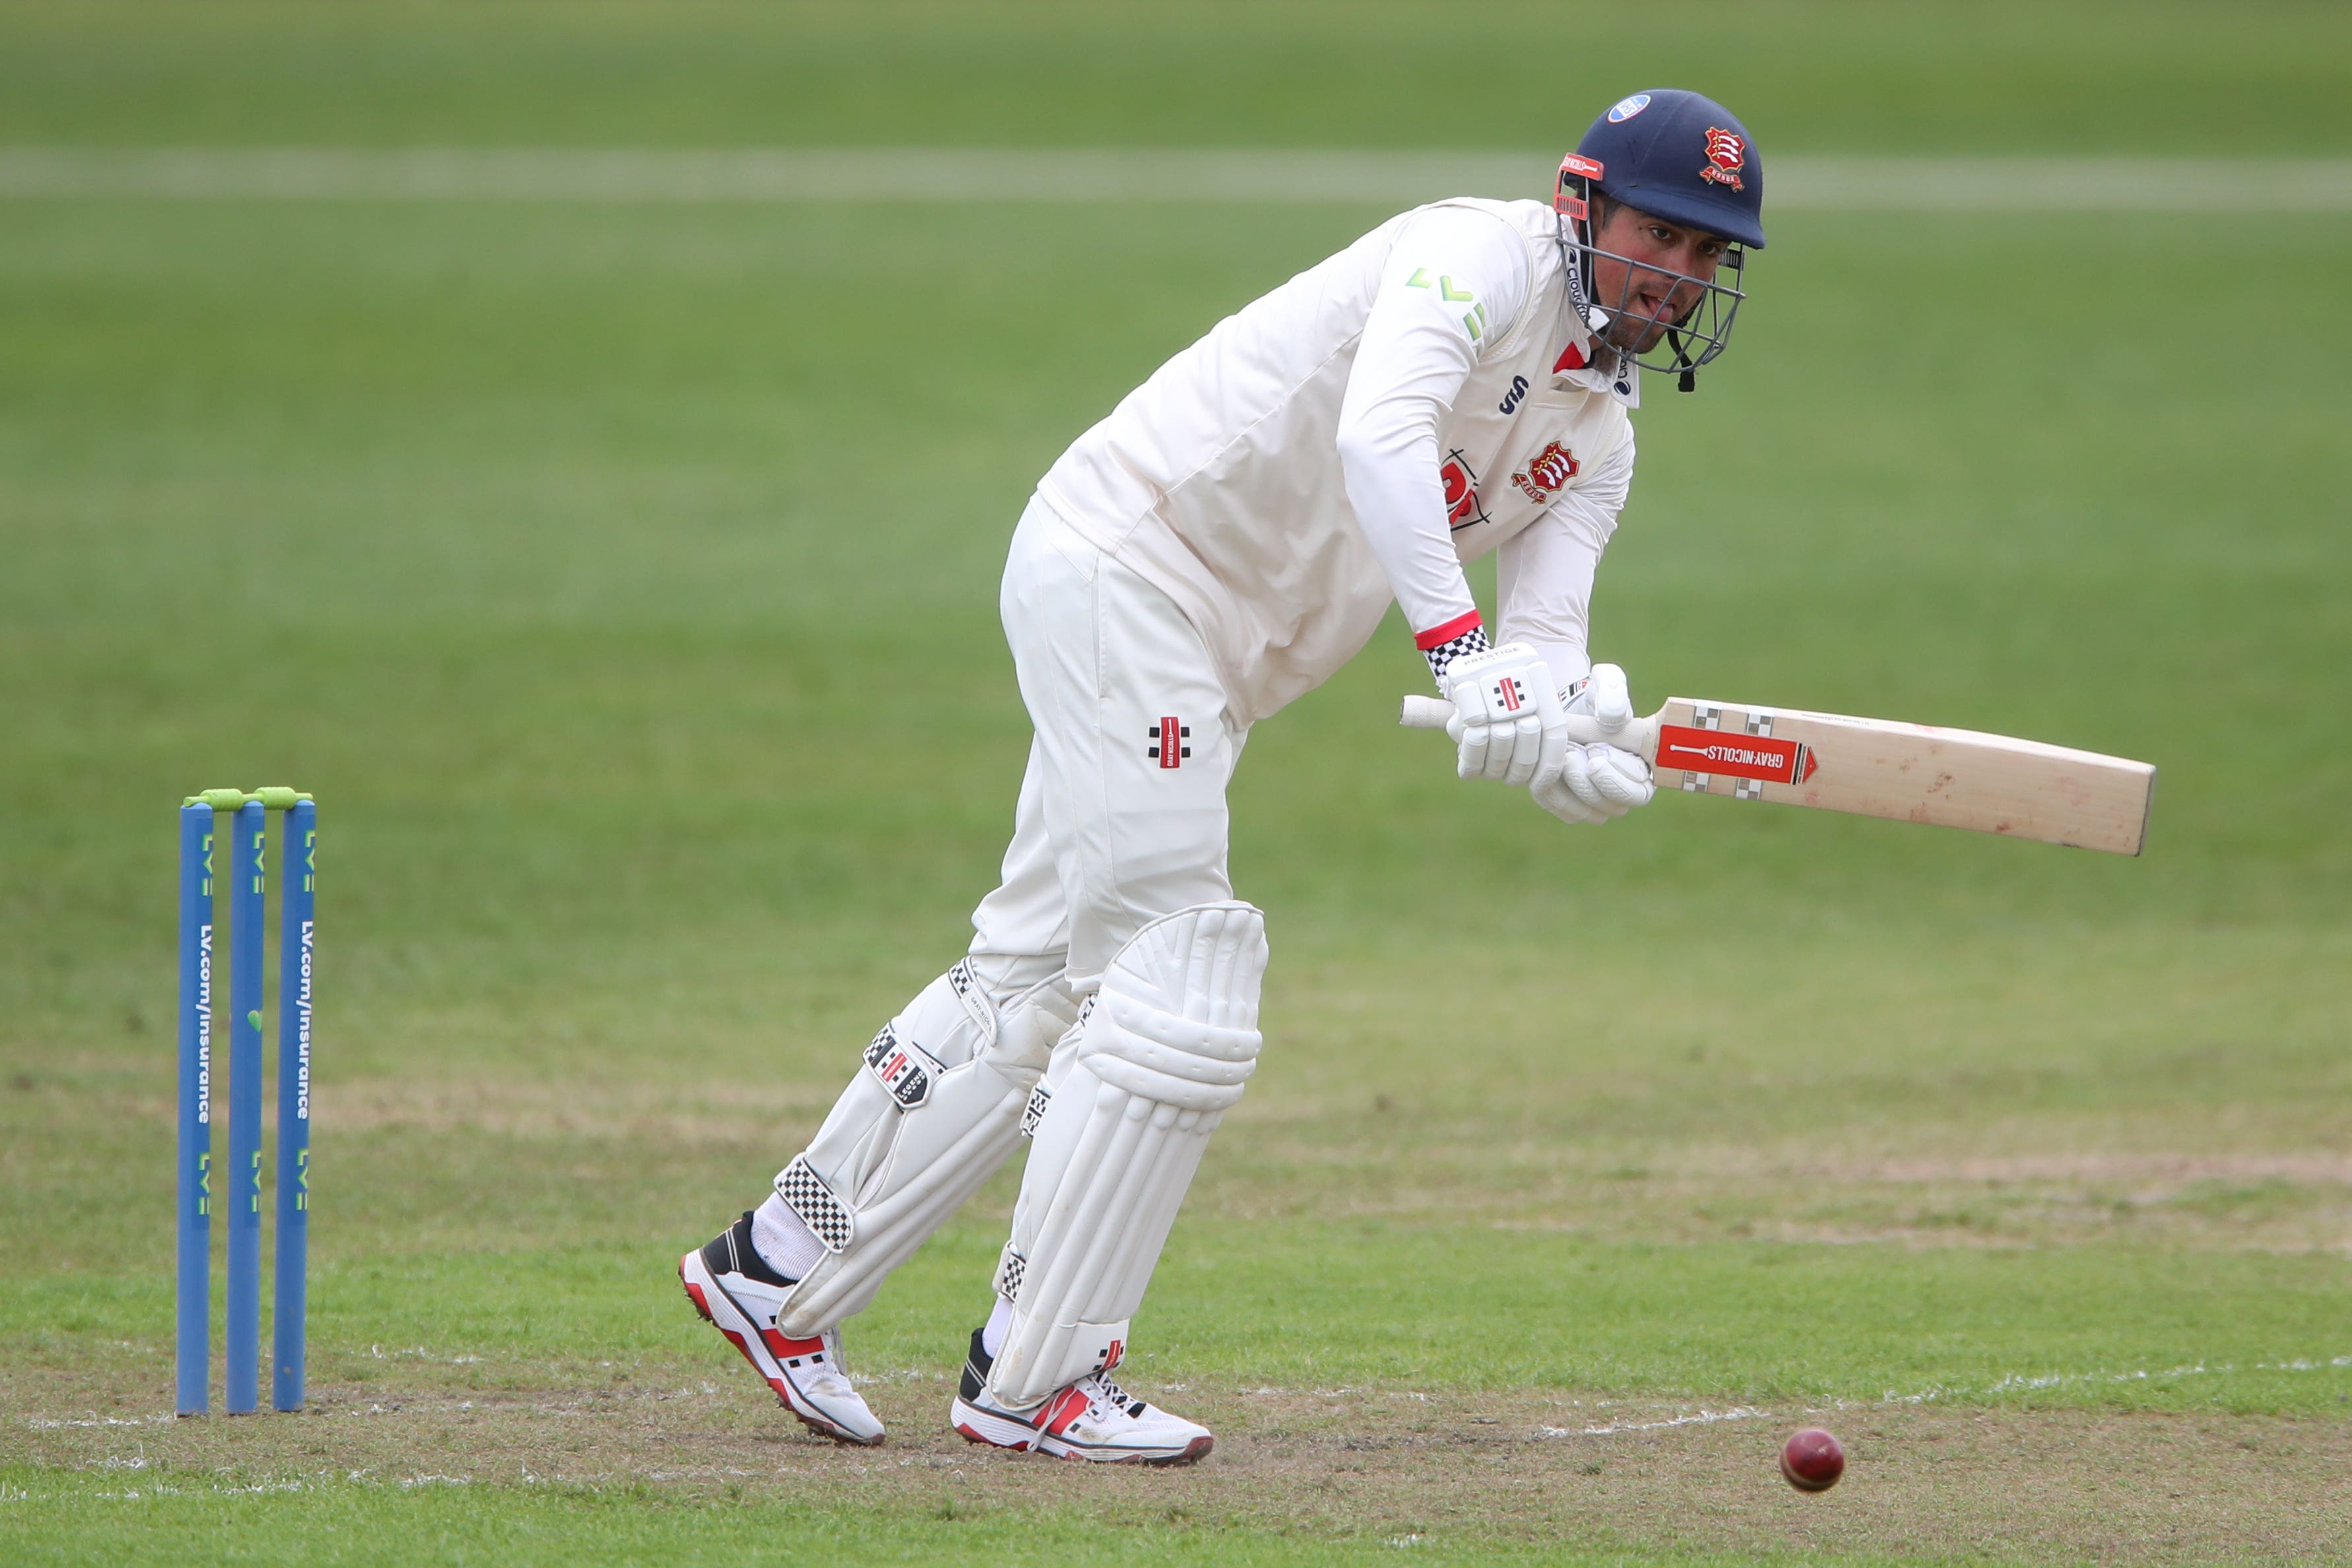 Sir Alastair Cook hit his 74th century as Essex took charge against Somerset (Nick Potts/PA)